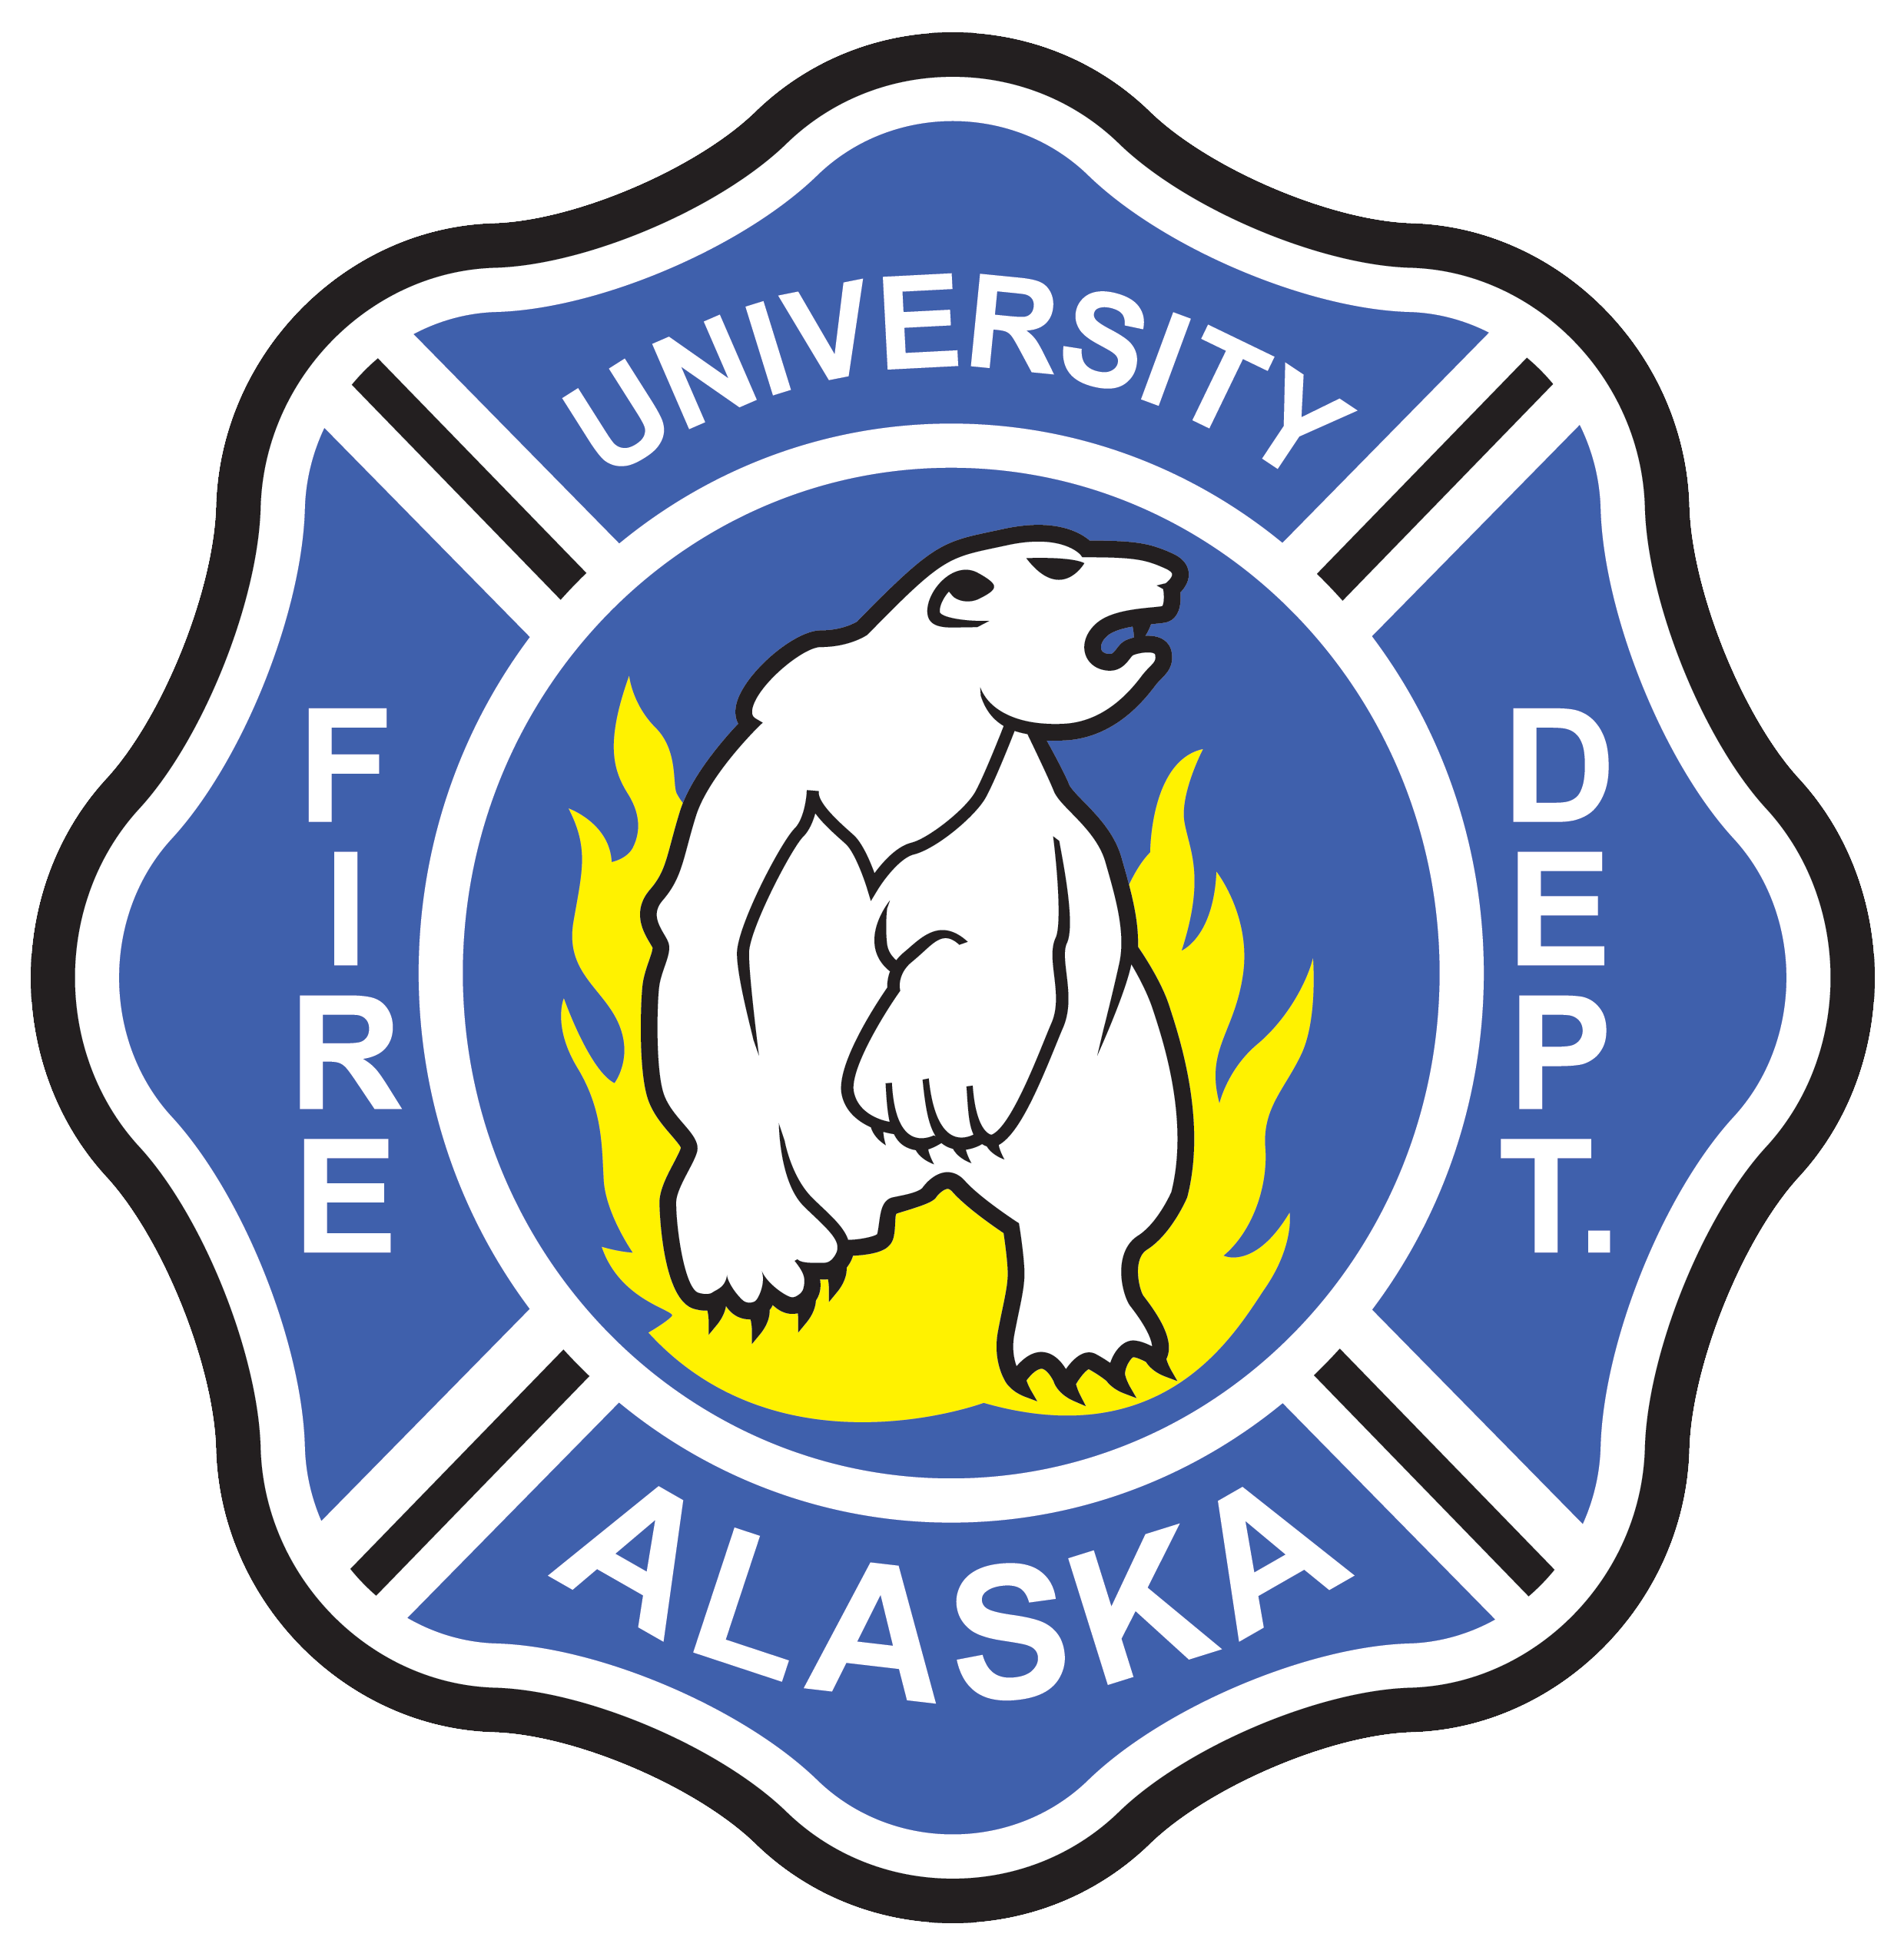 Firemen Logo - How To Become A Student or Scholarship Firefighter | University Fire ...